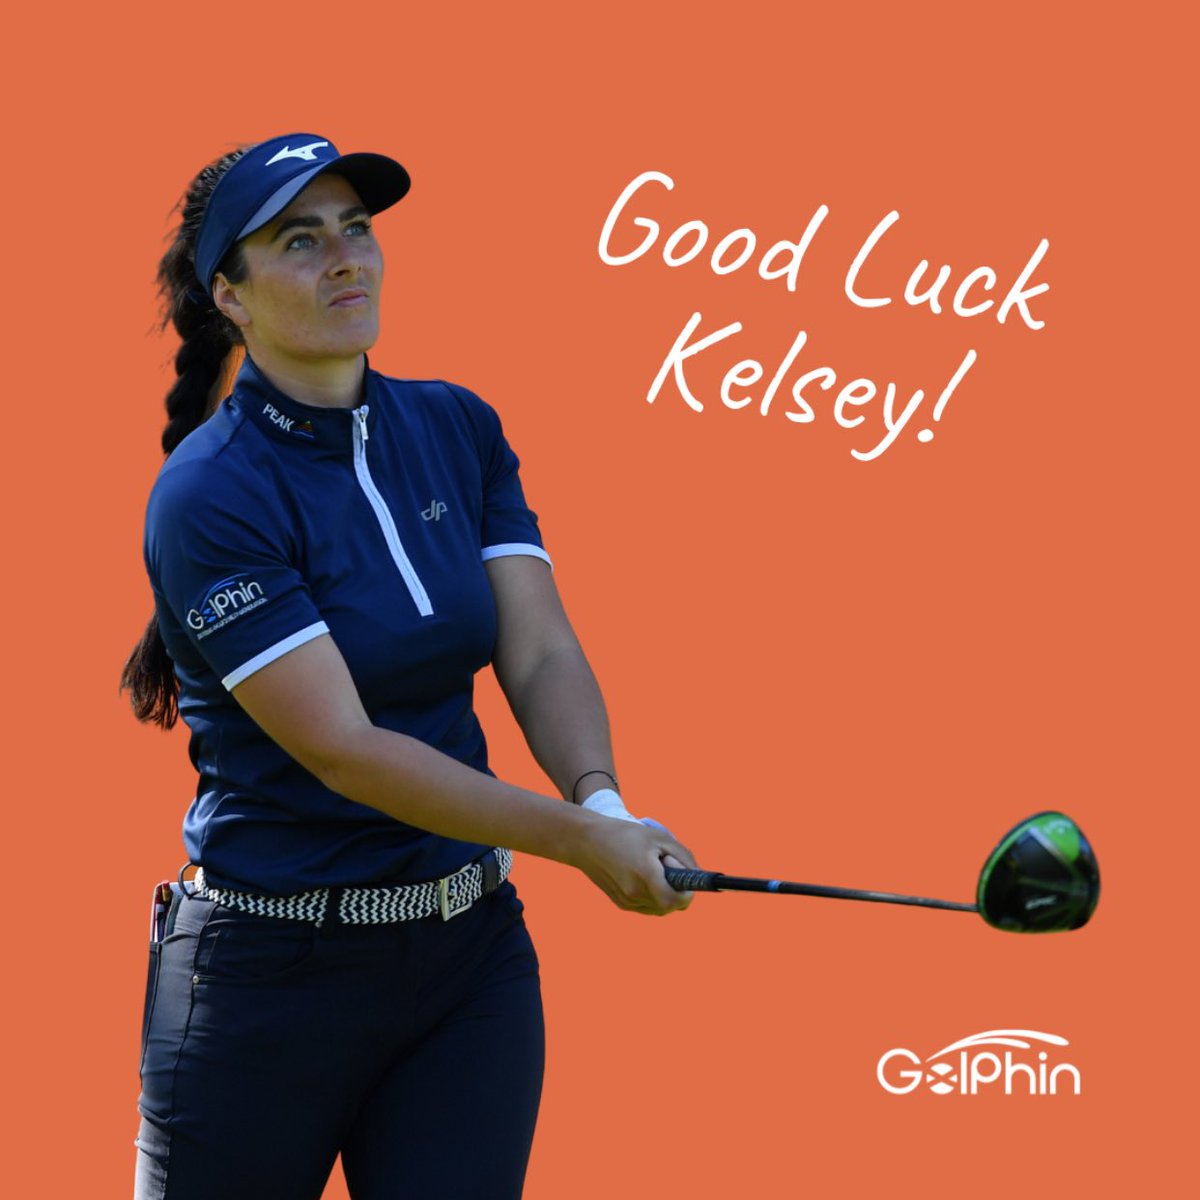 Good luck to GolPhin Ambassador @K_Mac_59 and her team in the @Aramco_Series this week 